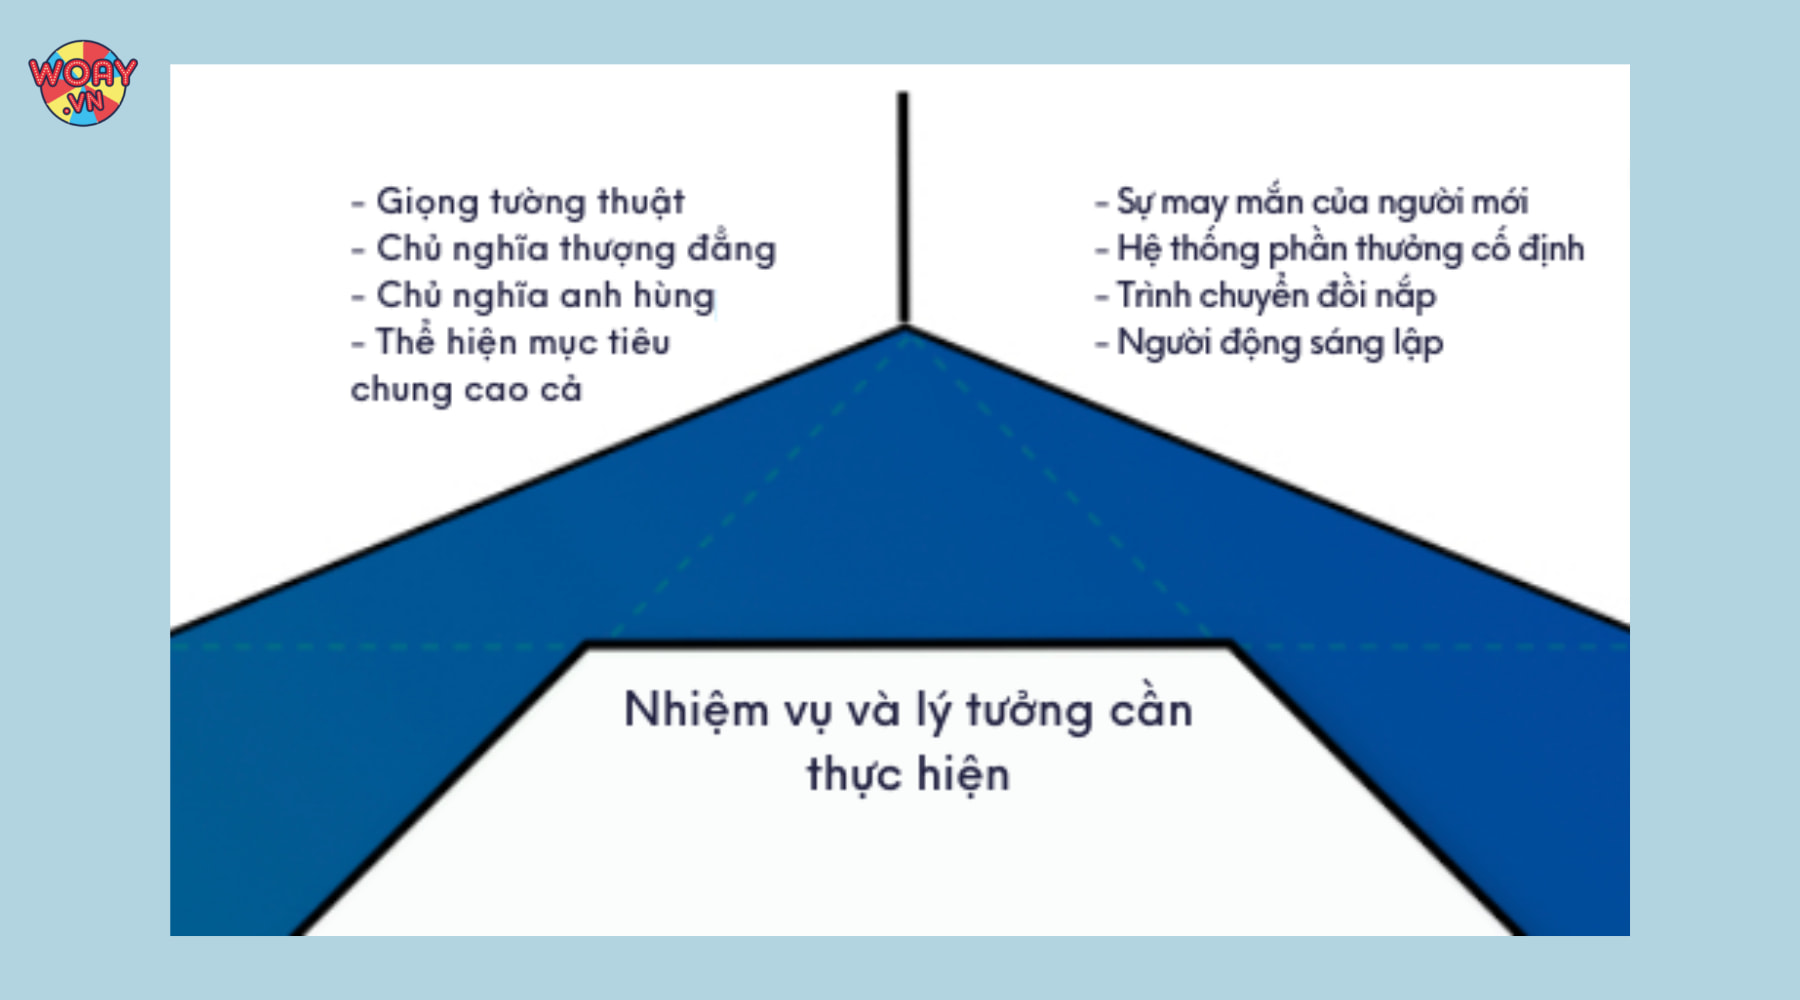 dong-luc-nhiem-vu-va-ly-tuong-can-thuc-hien-epic-meaning-and-calling-giup-nguoi-choi-cam-thay-co-trach-nhiem-hon-voi-cong-viec-duoc-giao